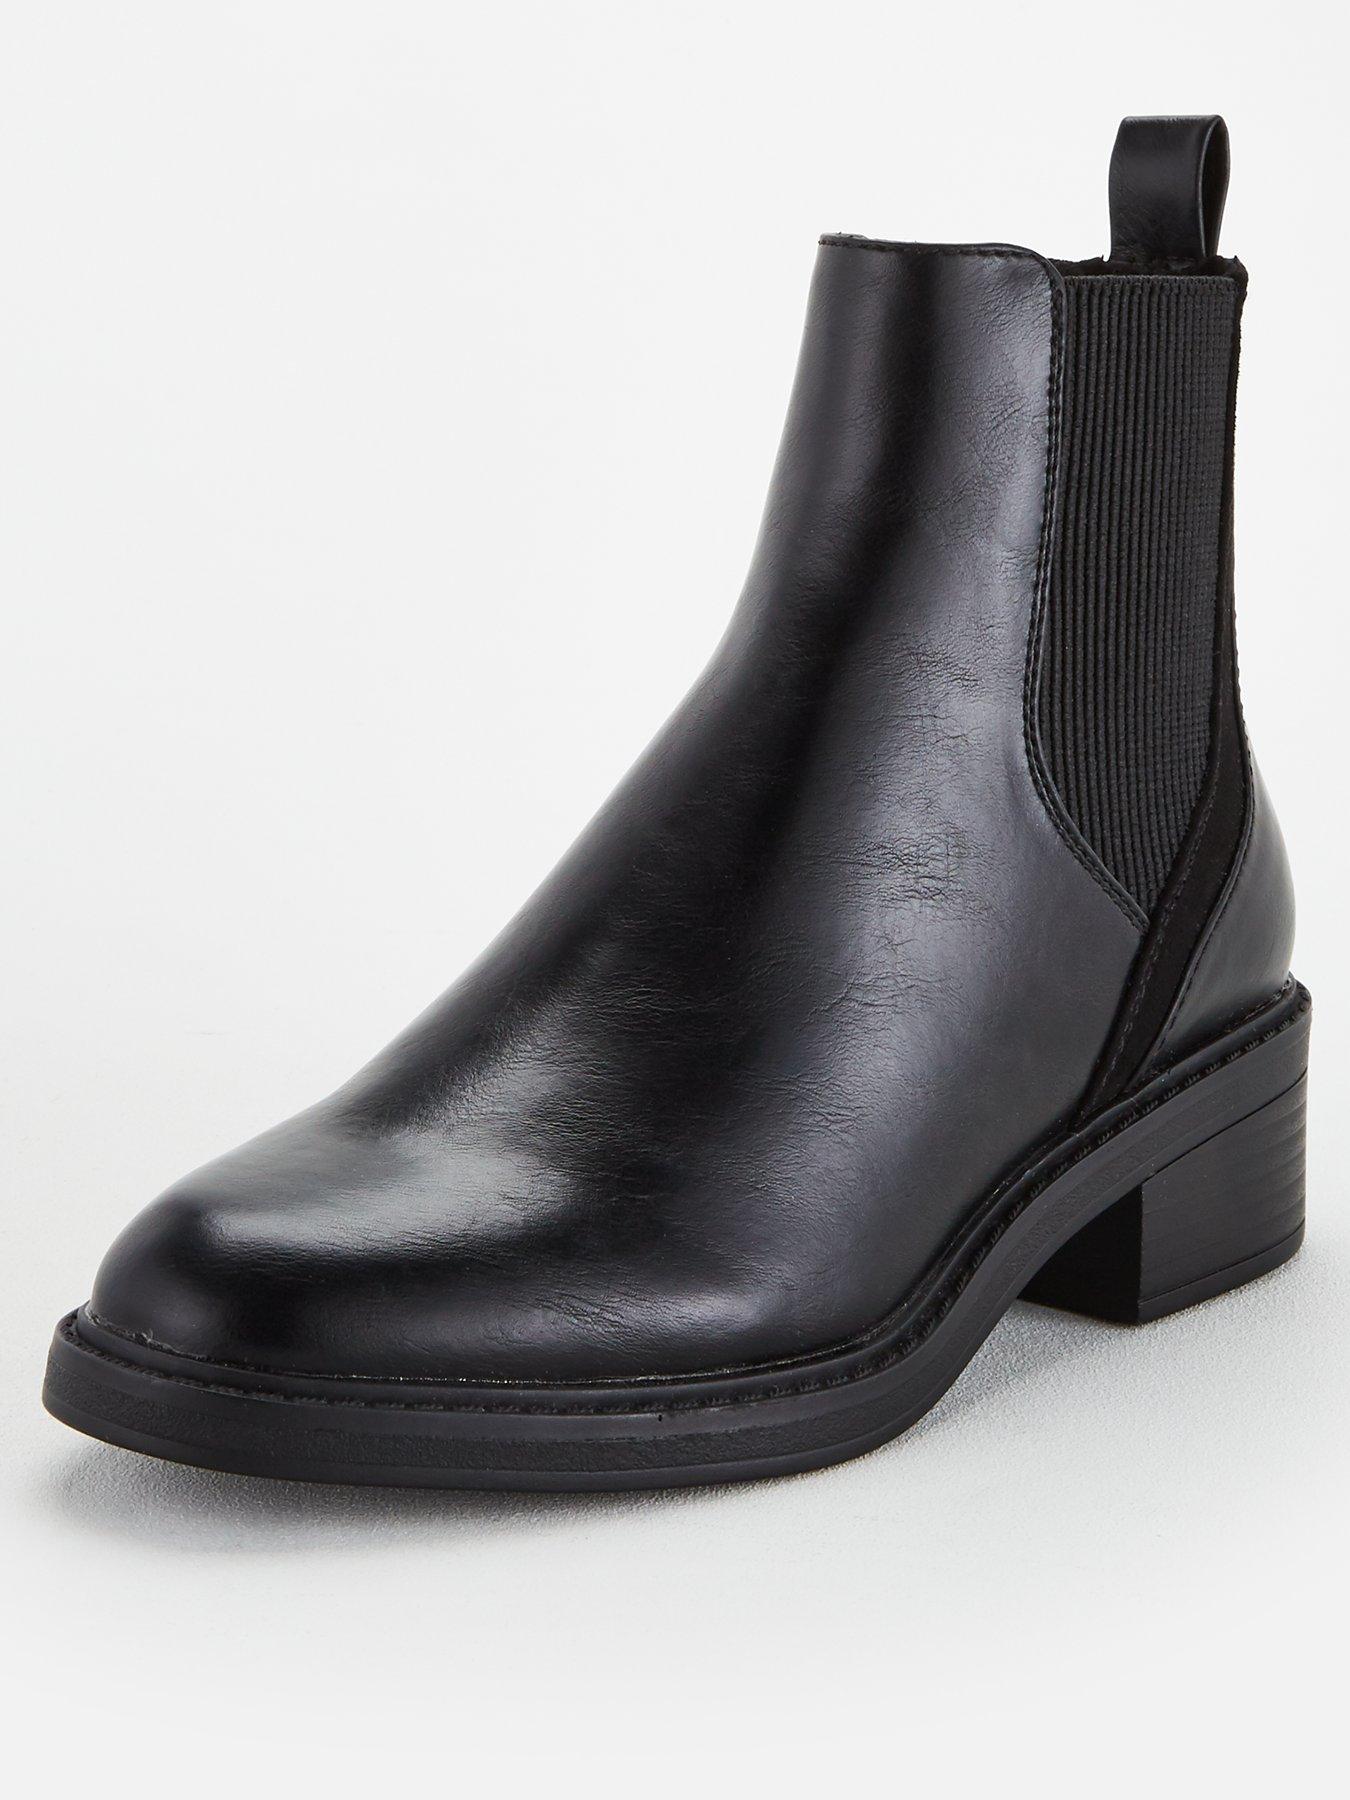 V by Very Fran Flat Chelsea Boots 